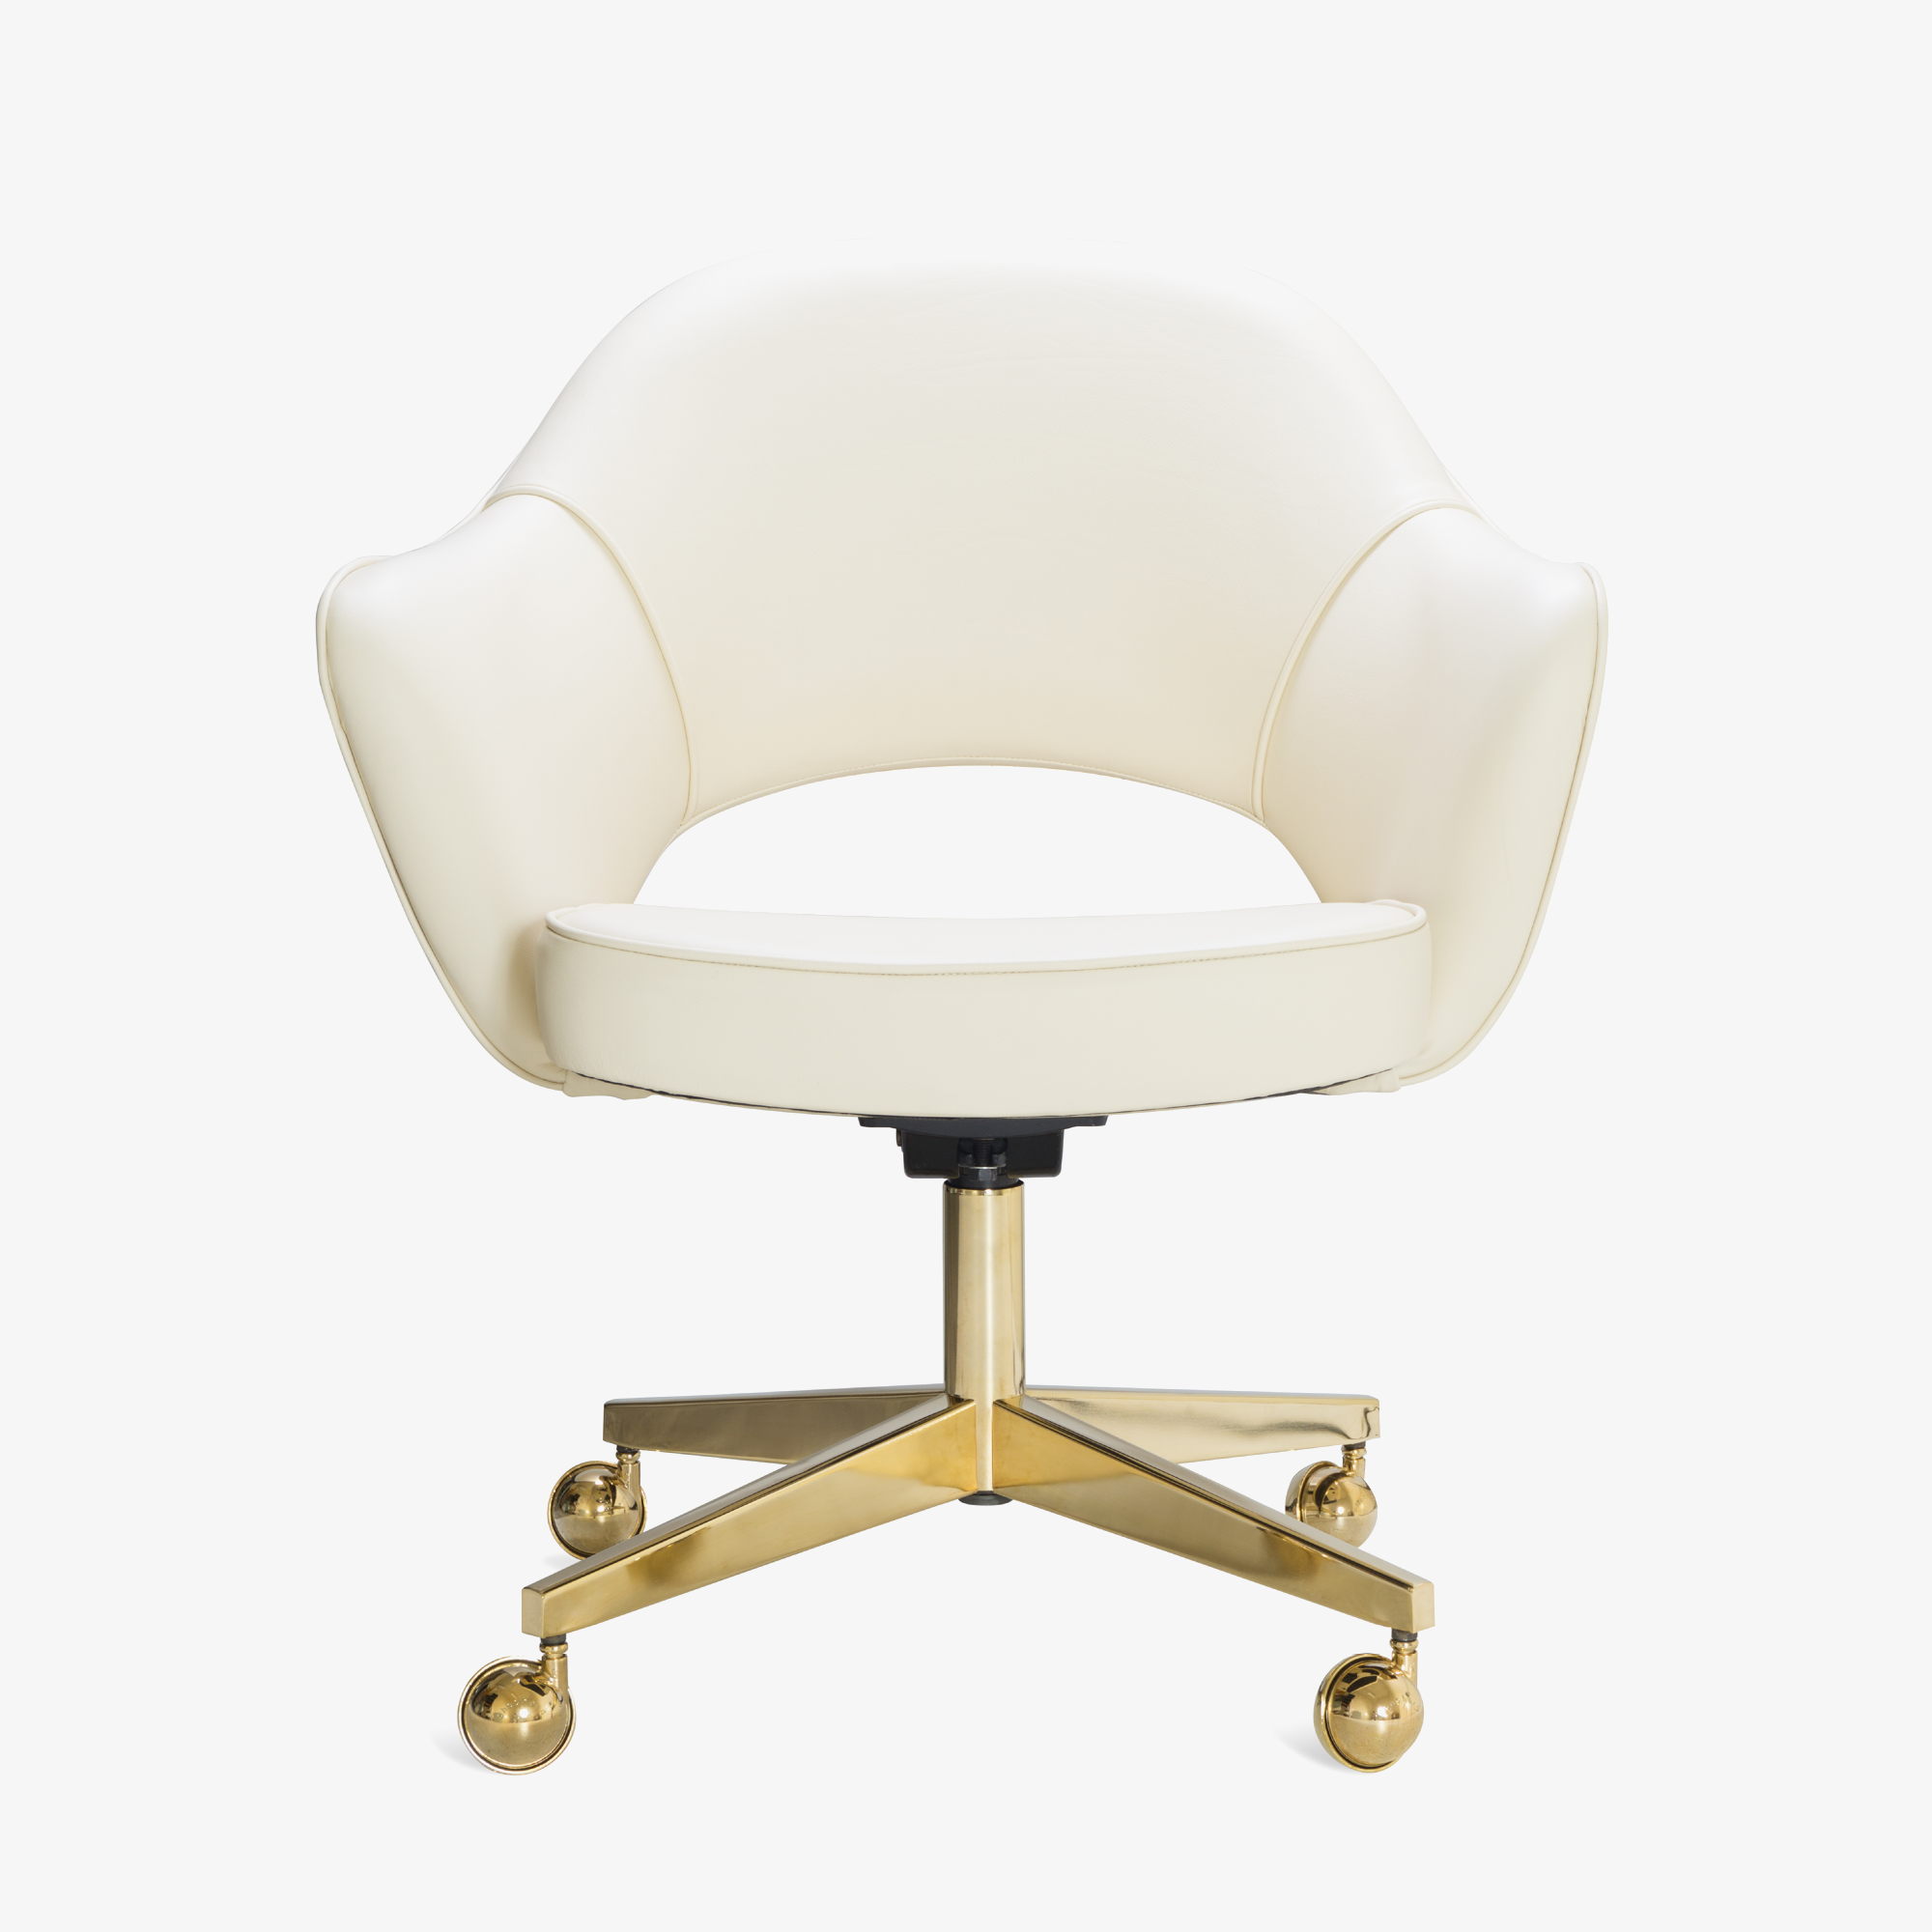 Saarinen Executive Arm Chair in Creme Leather, Swivel Base, 24k Gold Edition2.png